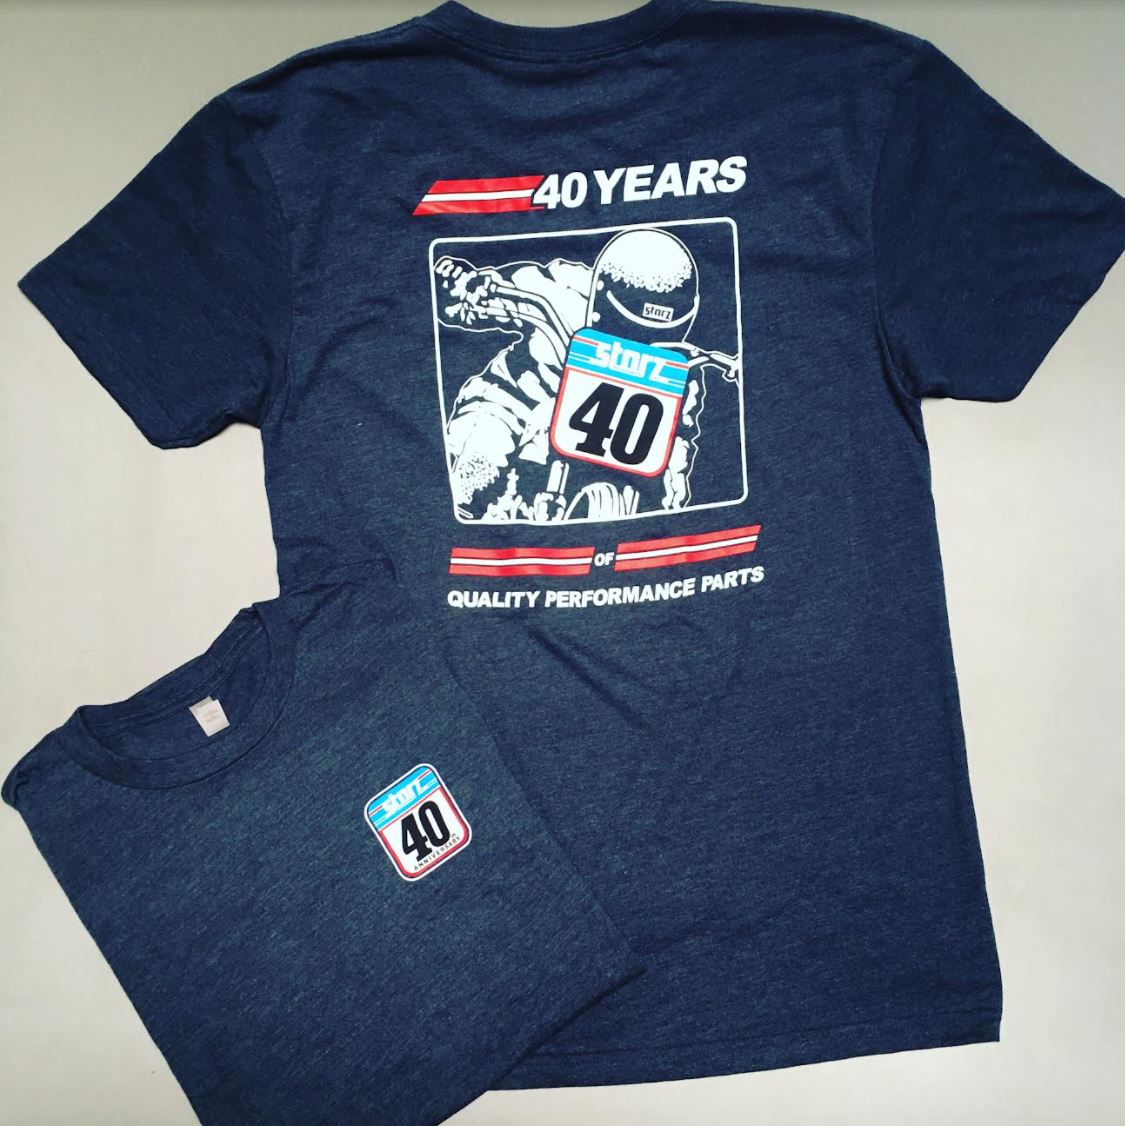 Storz Performance 40th Anniversary Tees